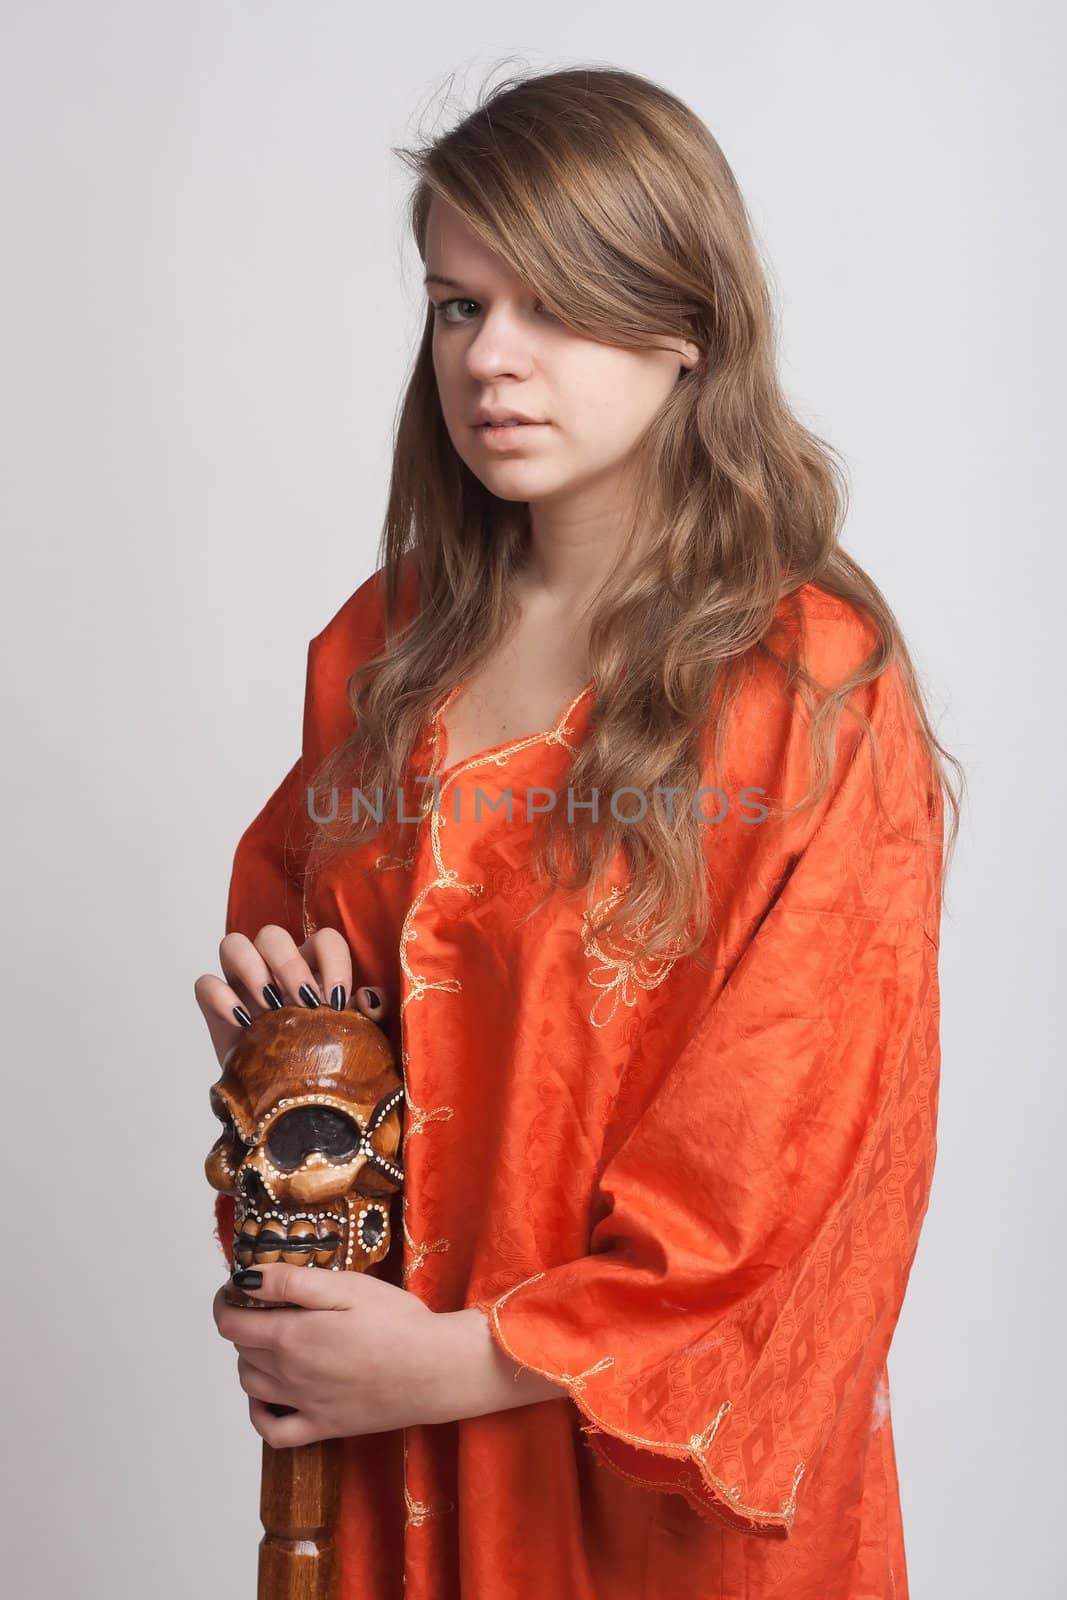 Girl in orange dress on a light background with a staff